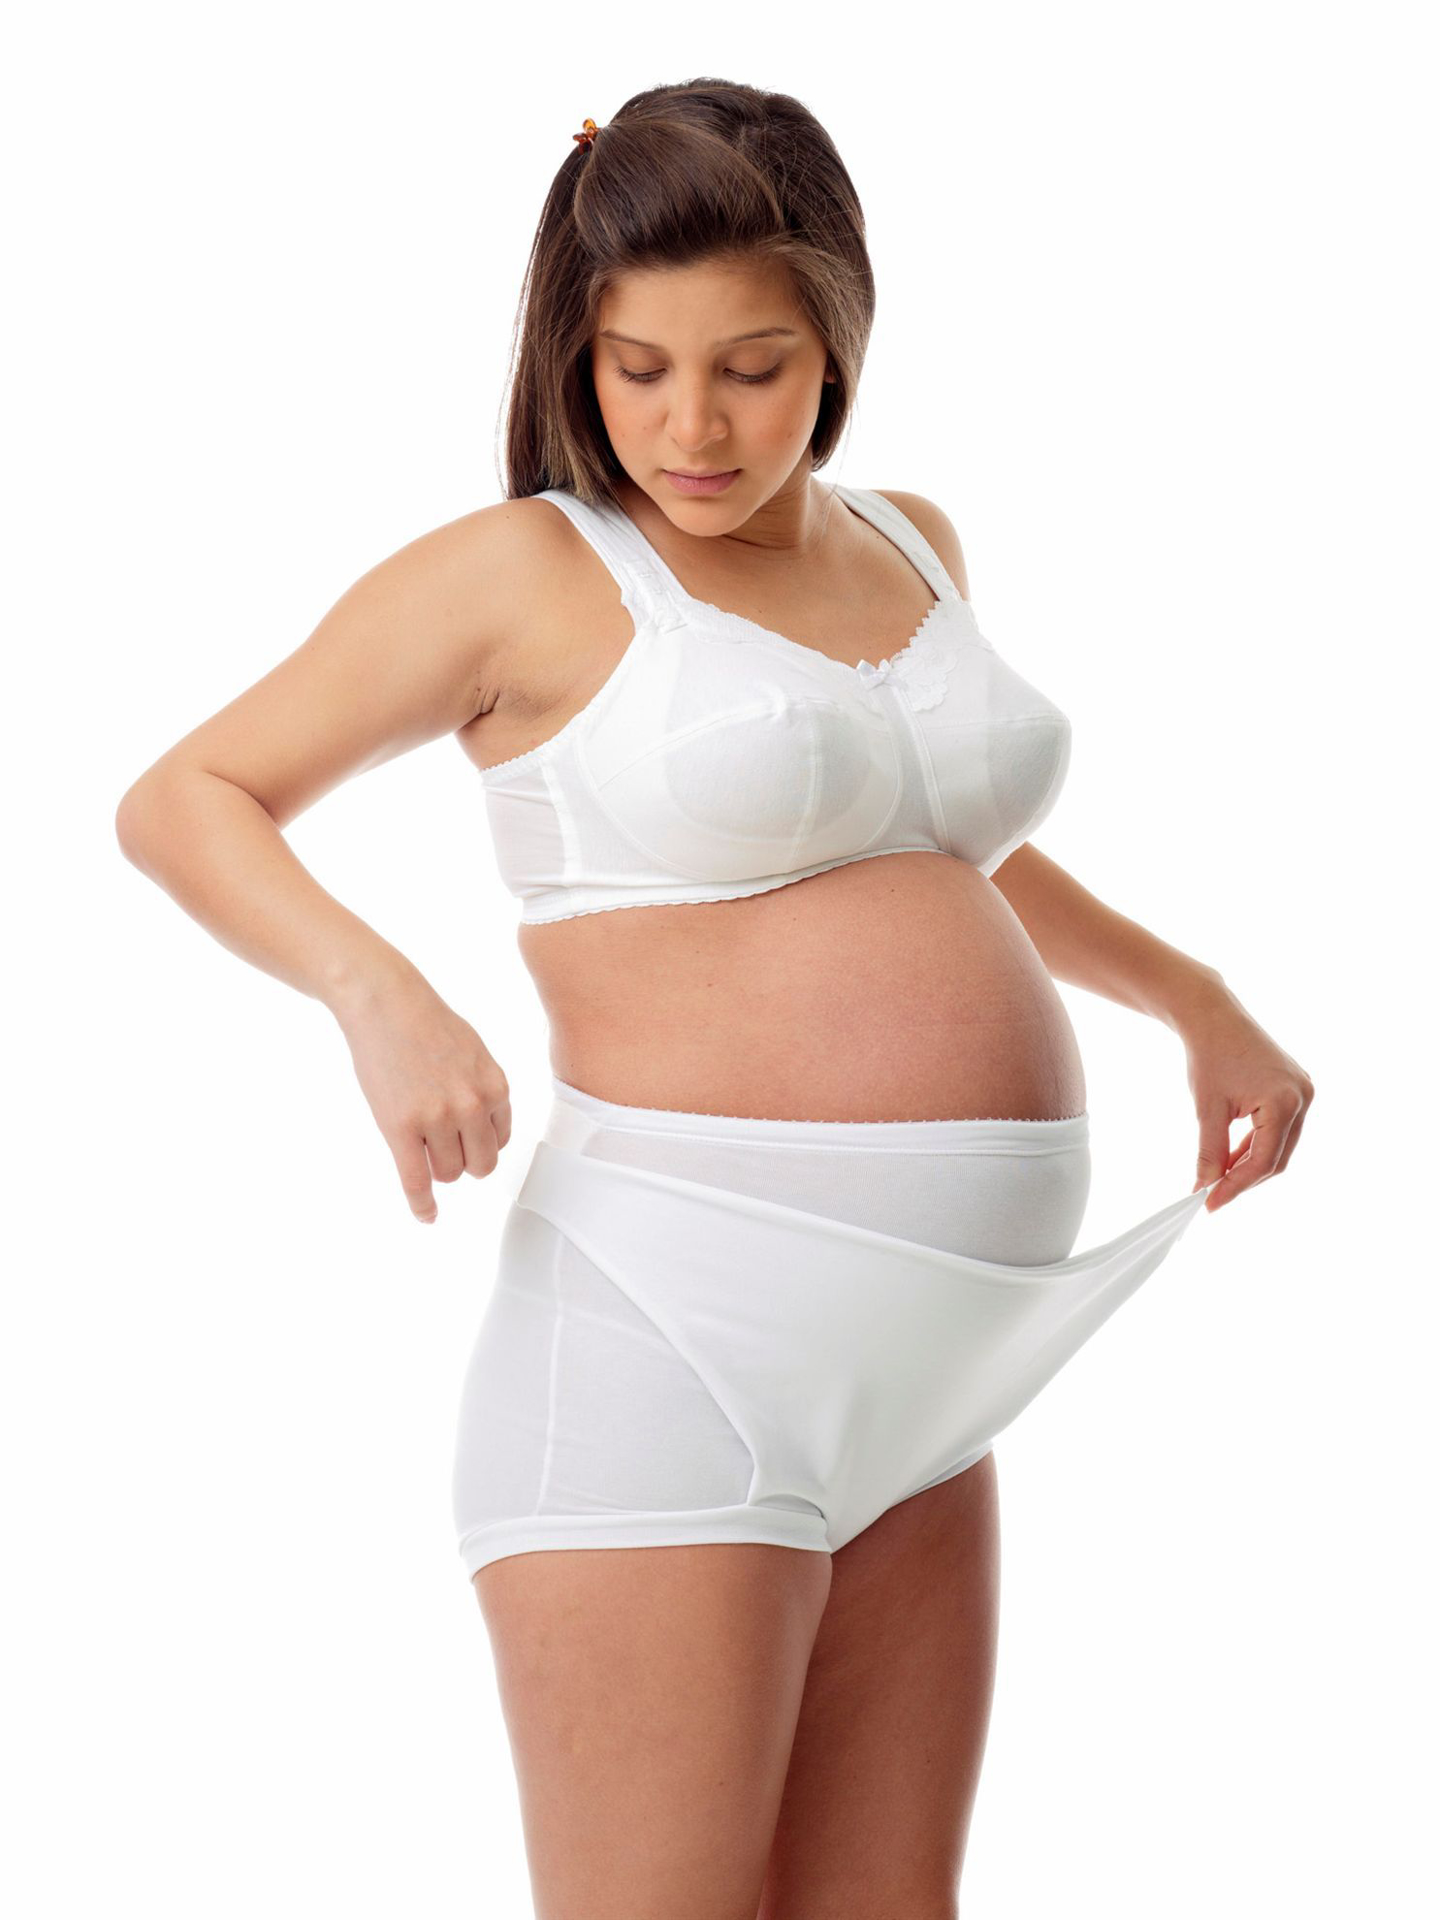 https://www.underworks.com/images/thumbs/0000022_adjustable-maternity-support-lift-brief.jpeg